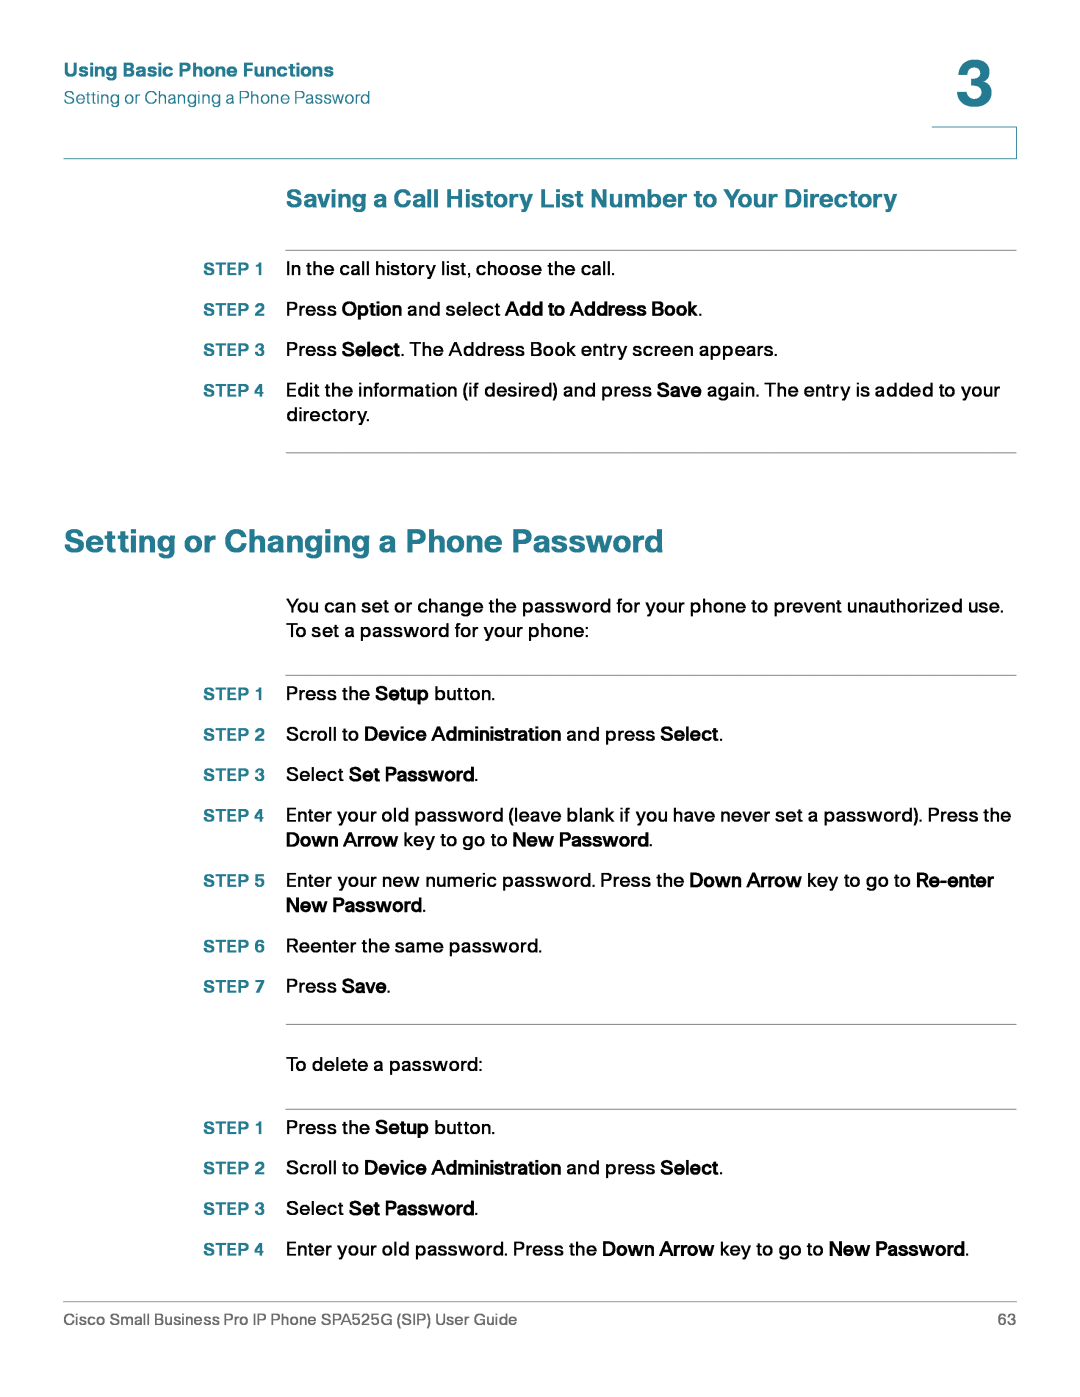 Cisco Systems SPA525G manual Setting or Changing a Phone Password, Saving a Call History List Number to Your Directory 